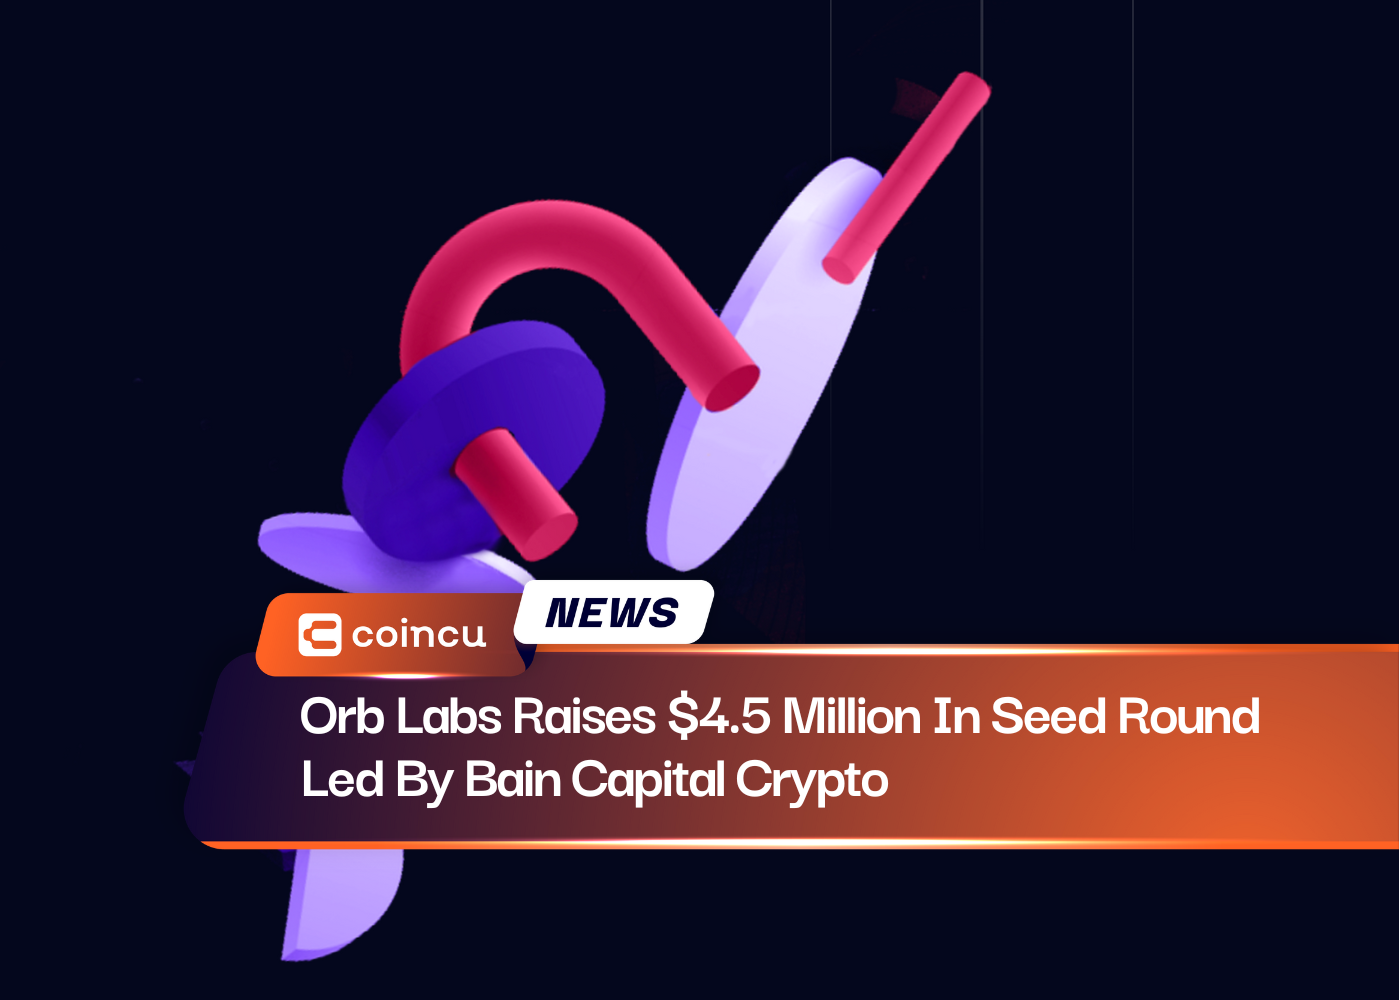 Orb Labs Raises $4.5 Million In Seed Round Led By Bain Capital Crypto